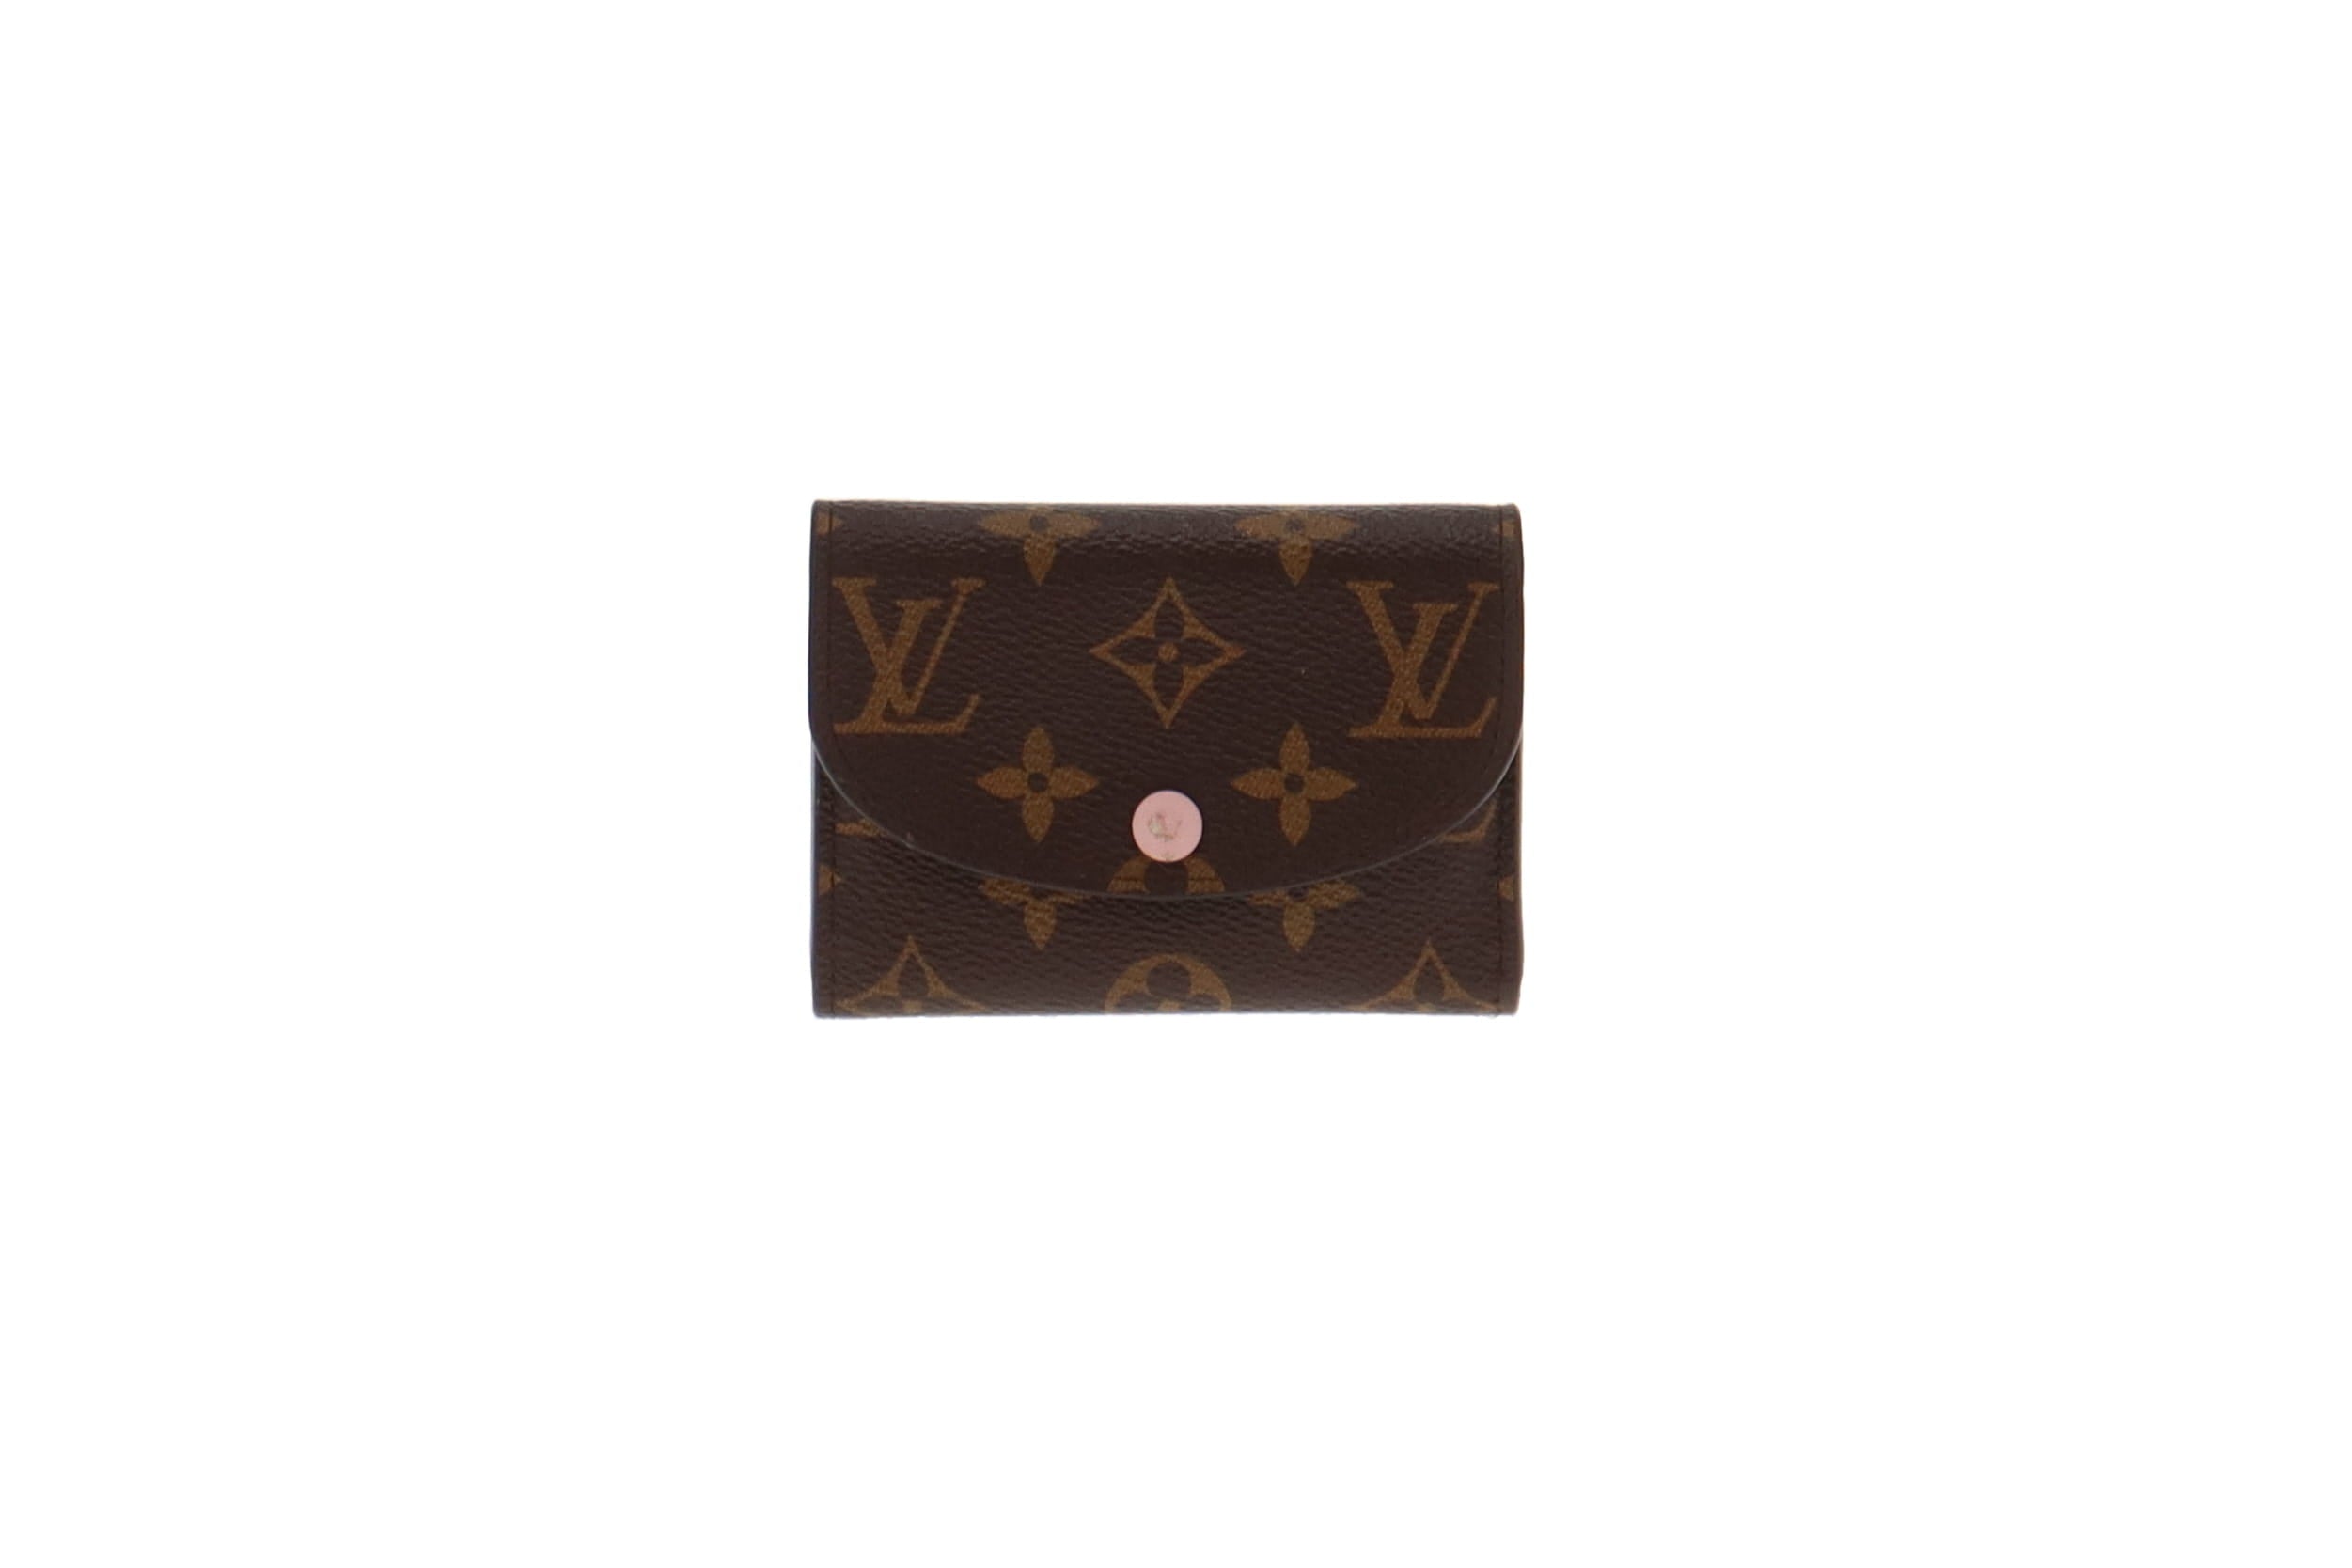 Rosalie Coin Purse Monogram Canvas in WOMEN's SMALL LEATHER GOODS WALLETS  collections by Louis Vuitton